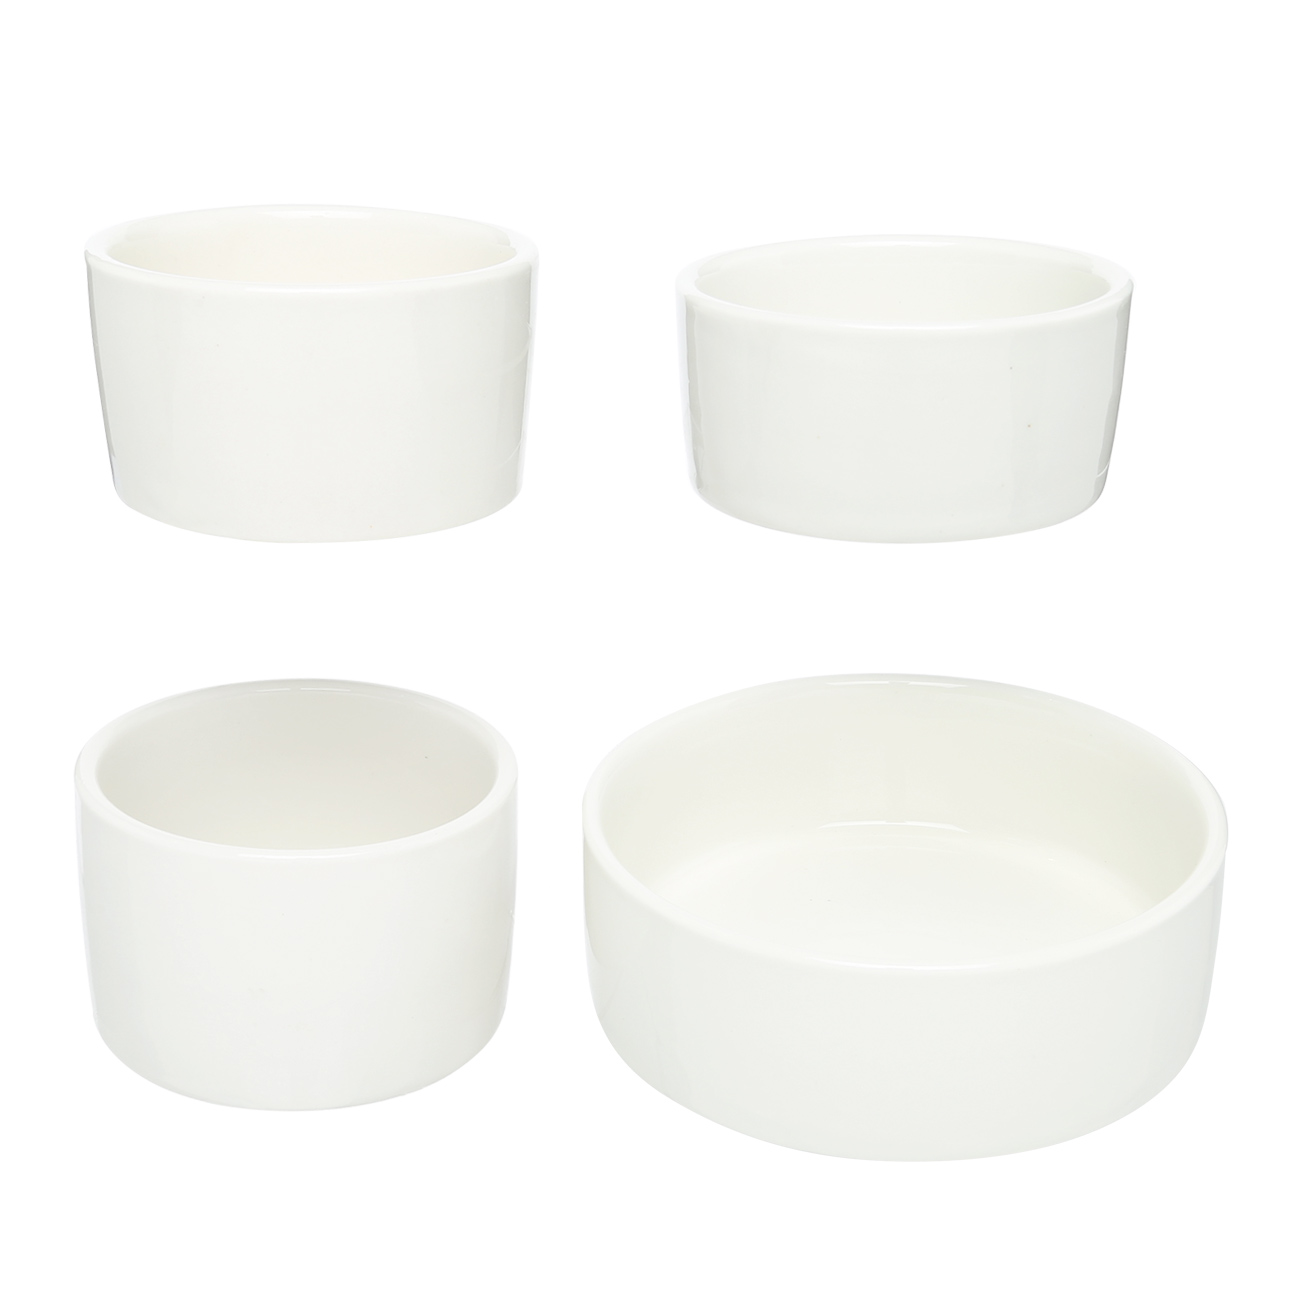 Snack set, 4 pcs, on a stand, ceramic / bamboo, white, round bowls, Bamboo изображение № 2